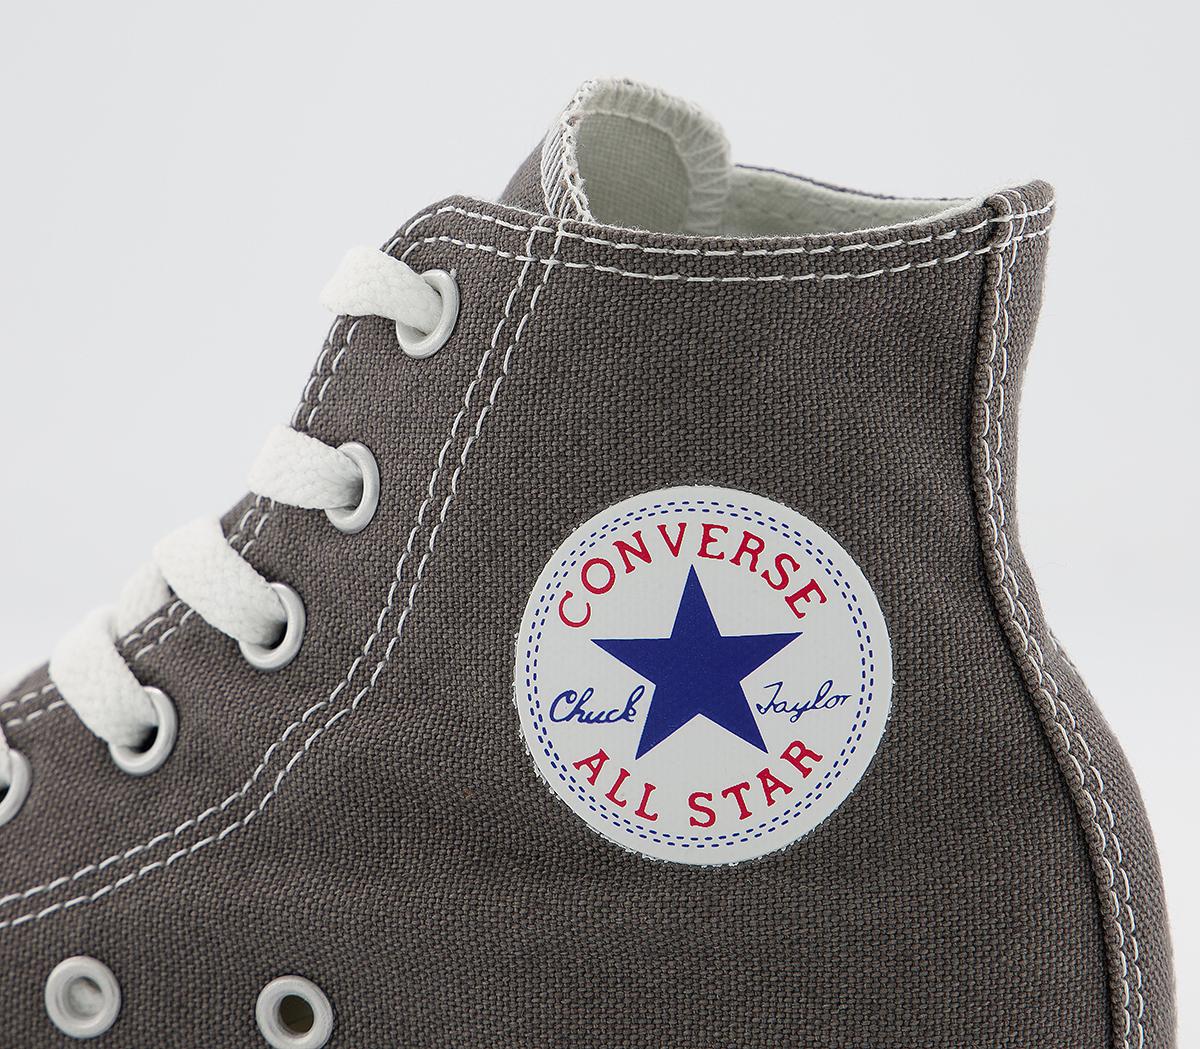 Converse All Star Hi Mid Sizes Charcoal - Unisex